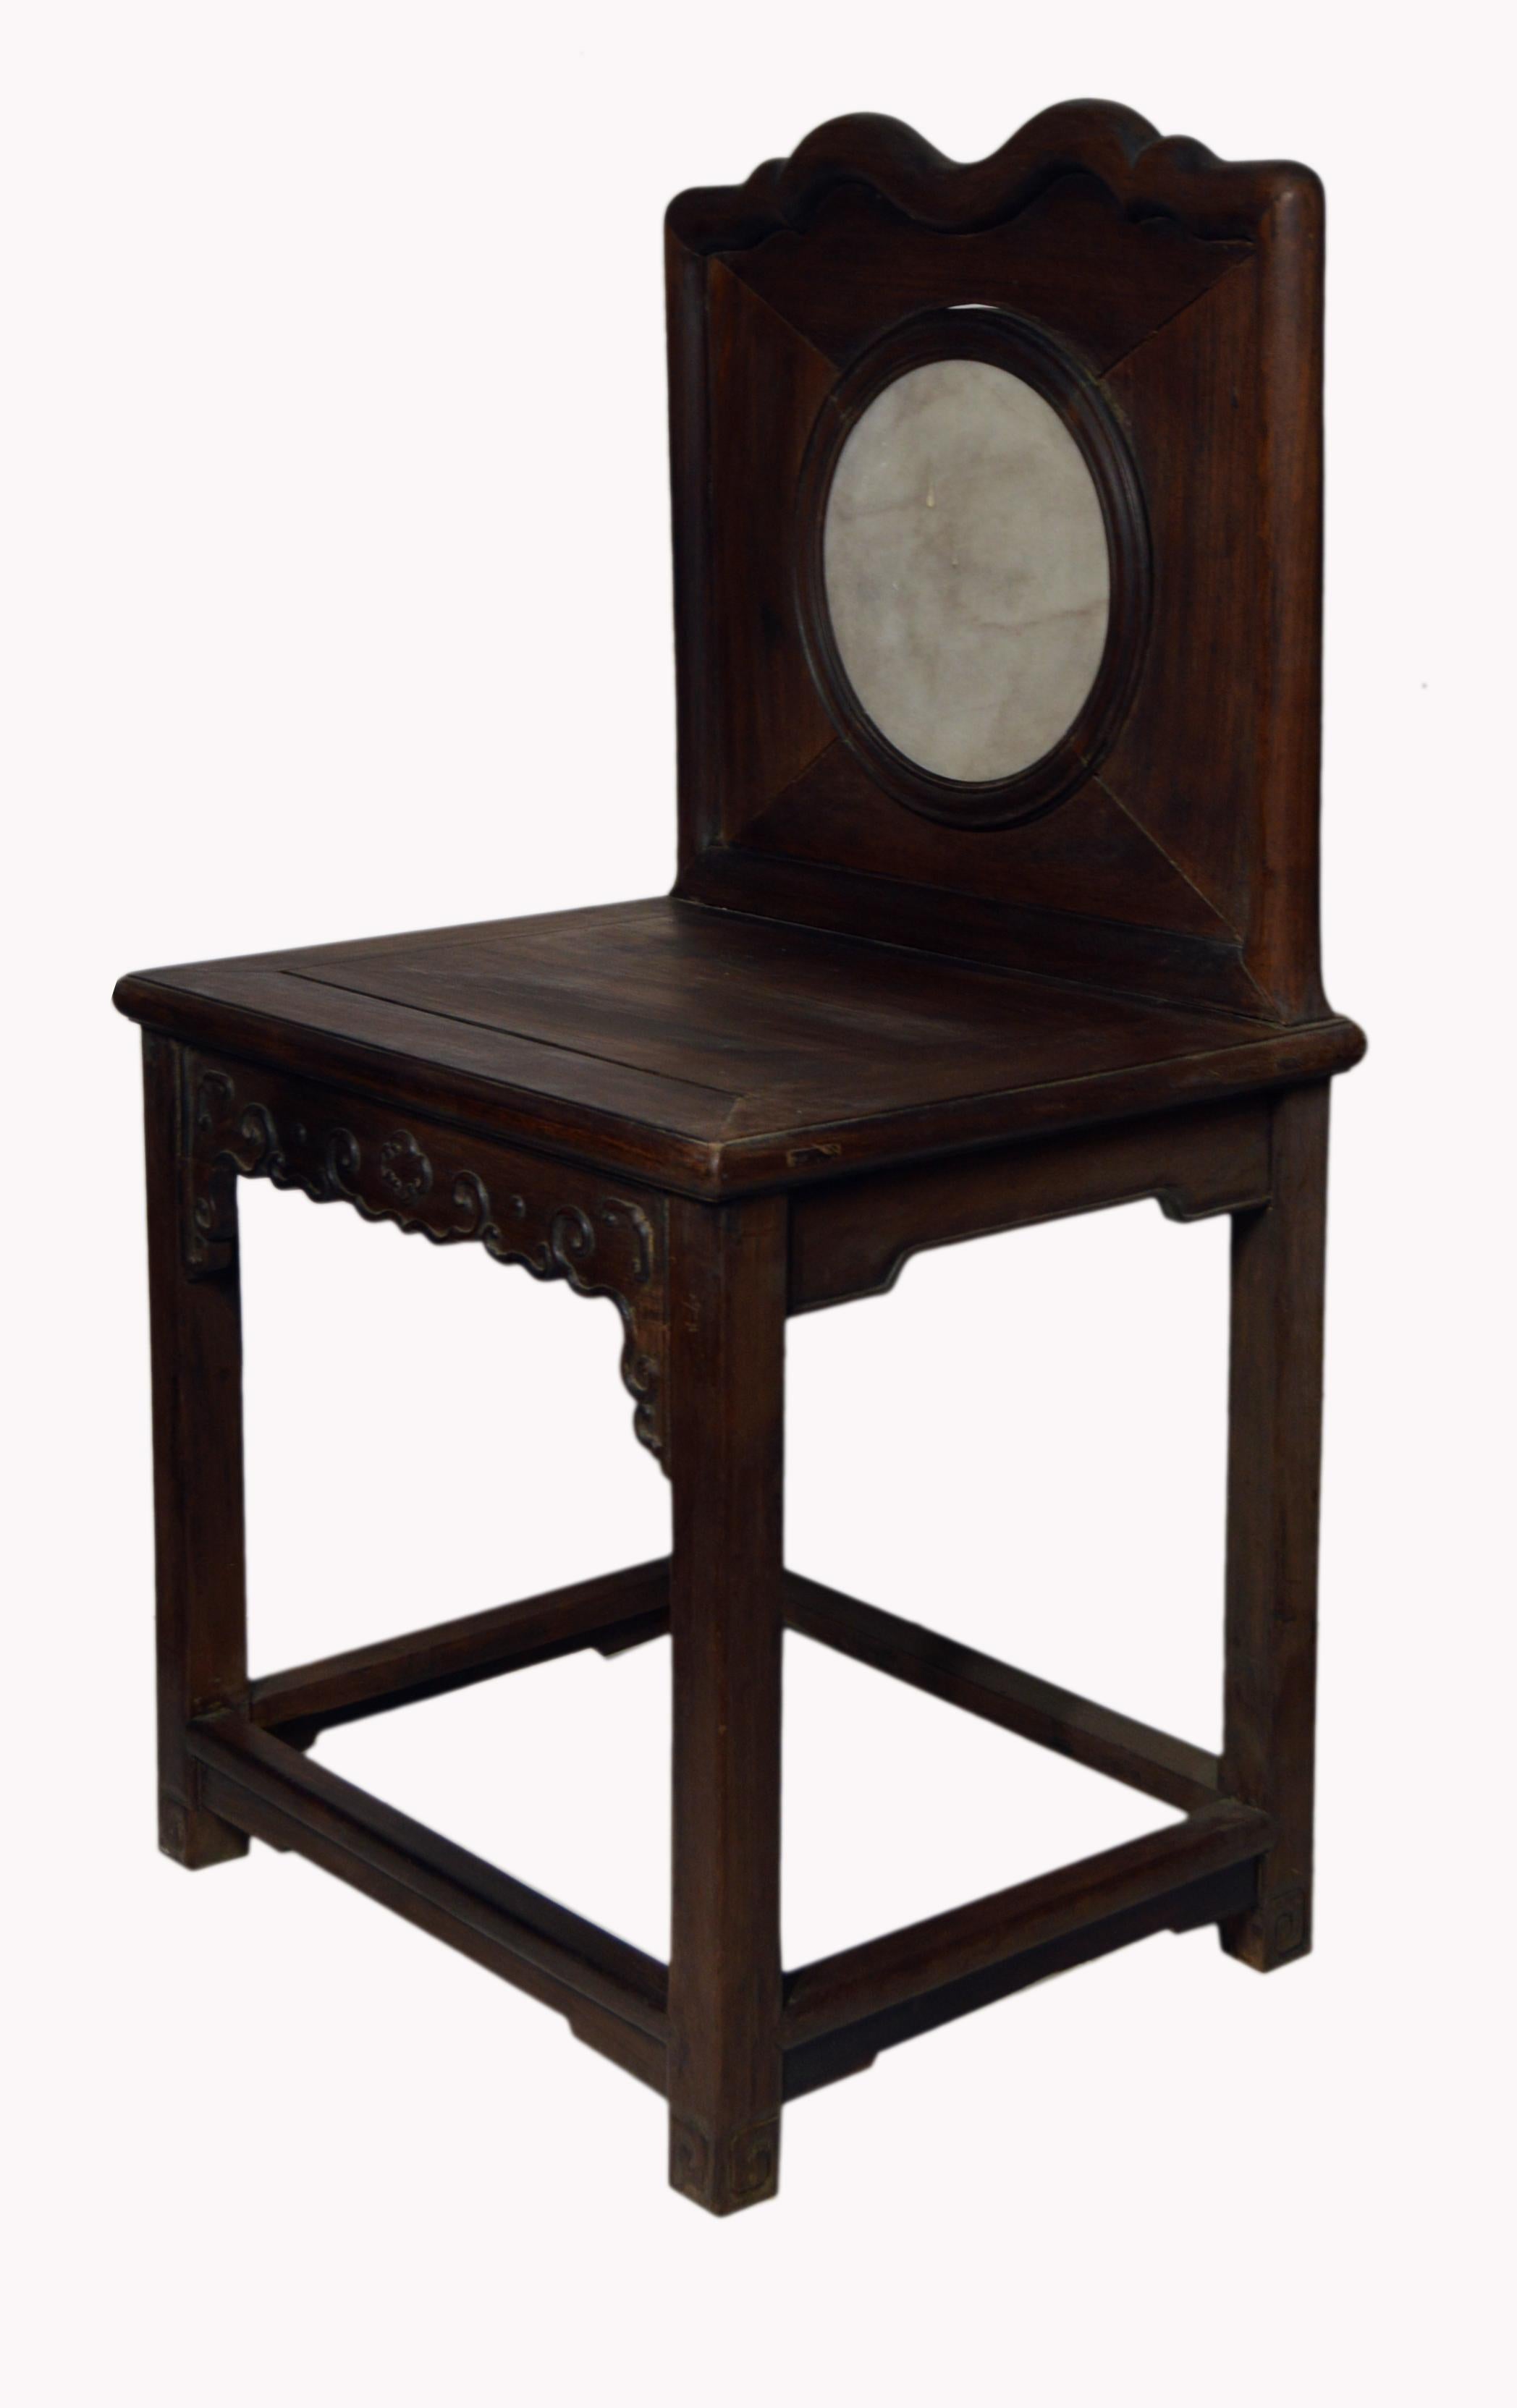 Elm Chinese 19th Century Dark Lacquered Yumu Wood Accent Chair with Marble Medallion